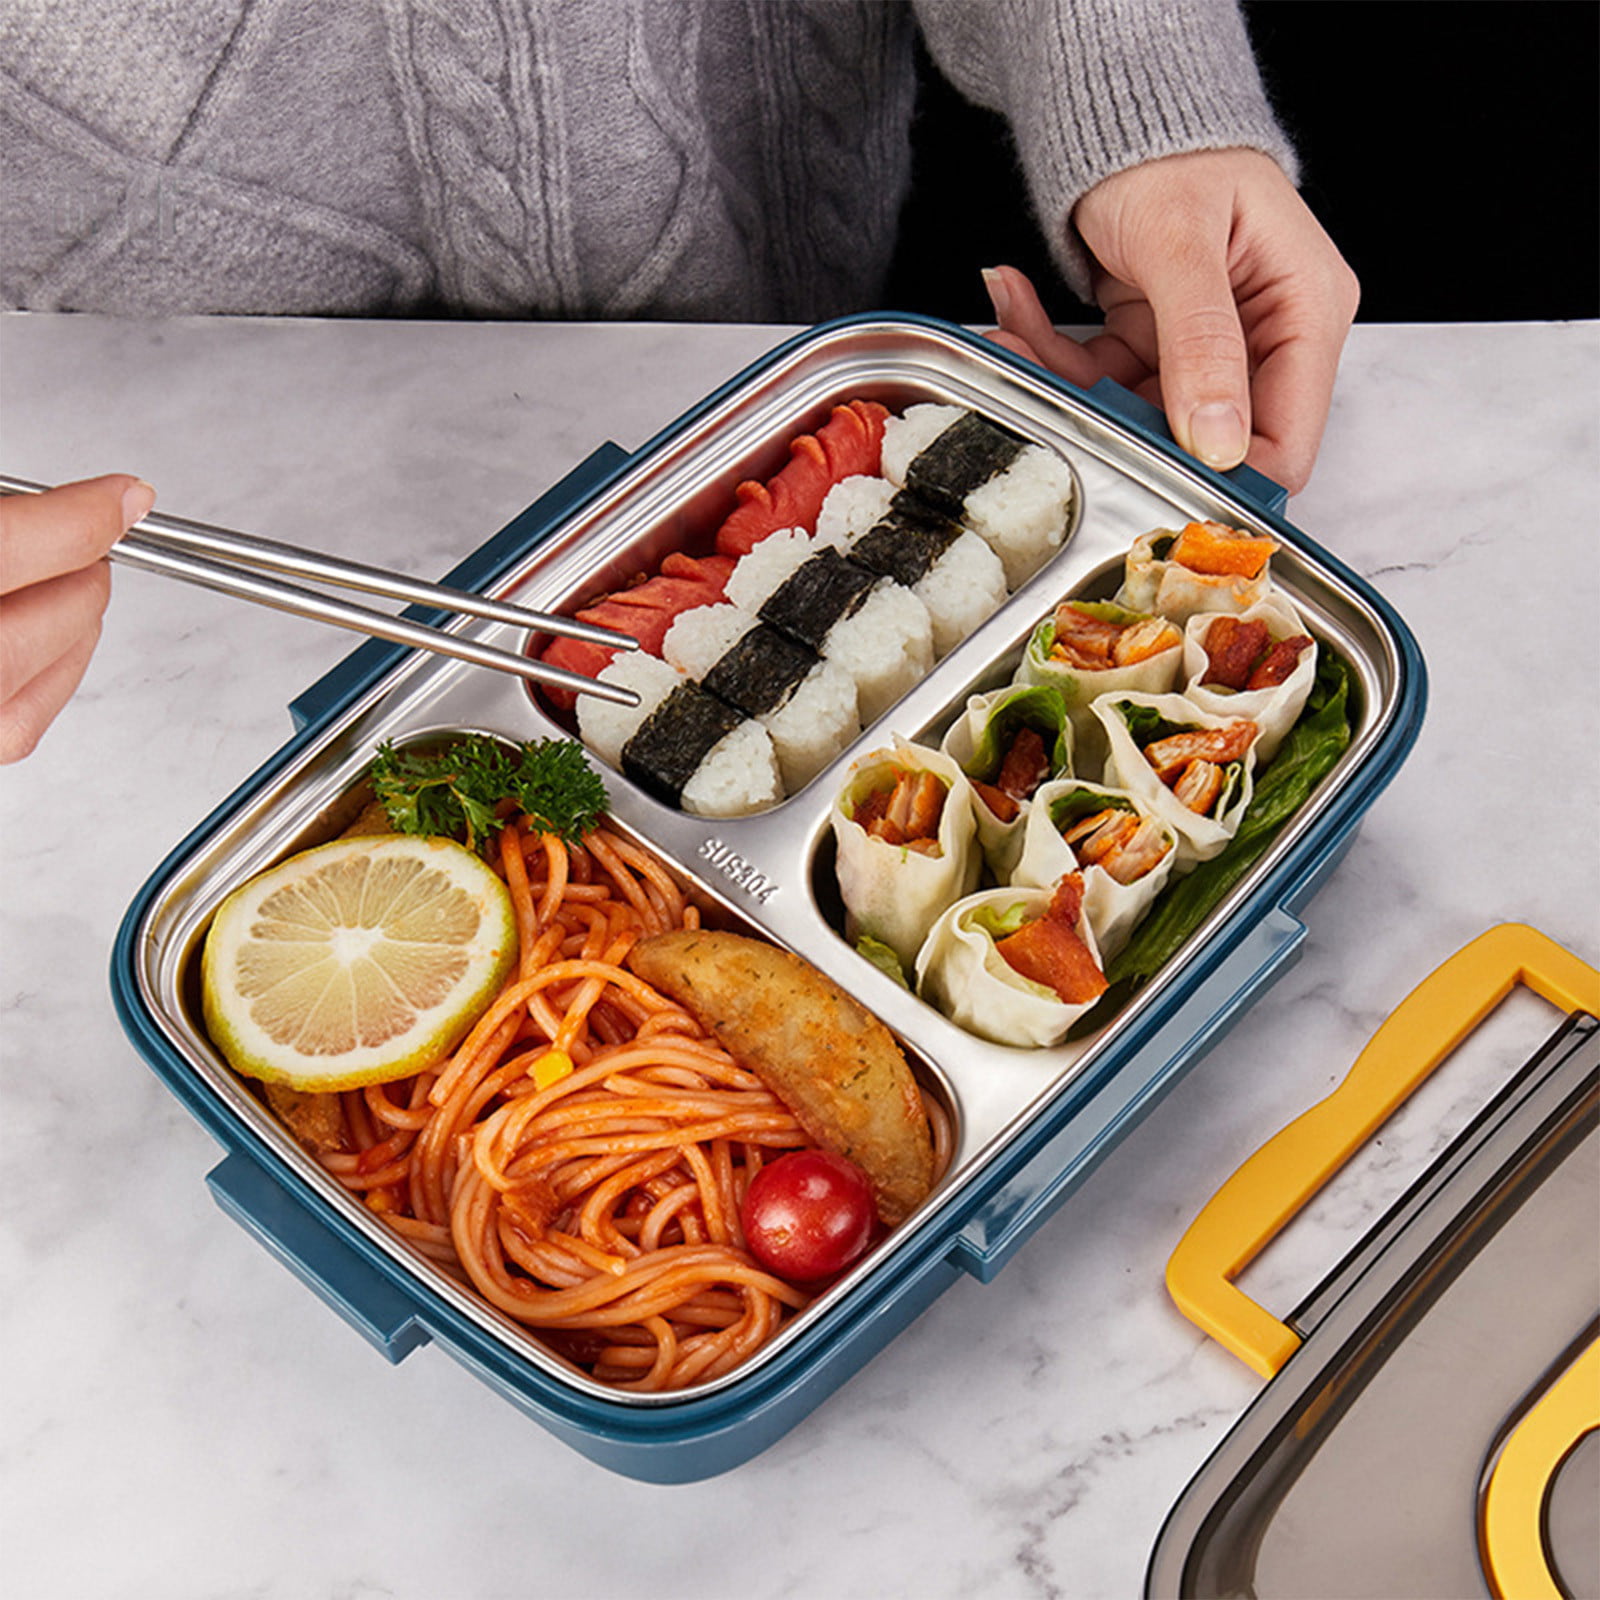 Bentgo® Classic - Adult Bento Box, All-in-One Stackable Lunch Box Container  with 3 Compartments, Plastic Utensils, and Nylon Sealing Strap, BPA Free